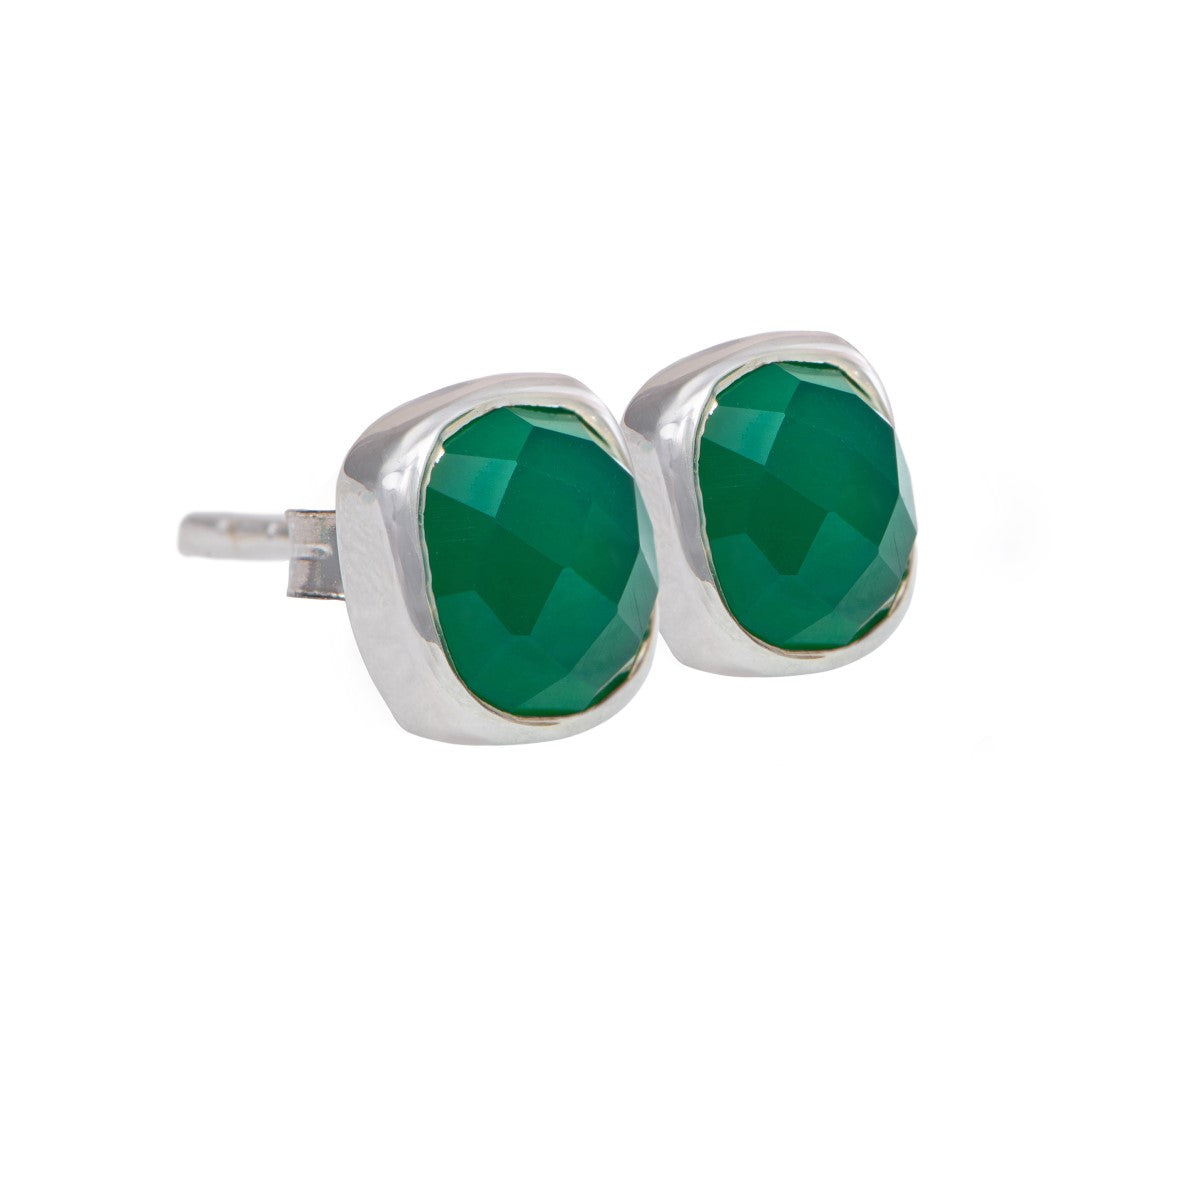 Faceted Square Green Onyx Gemstone Stud Earrings in Sterling Silver